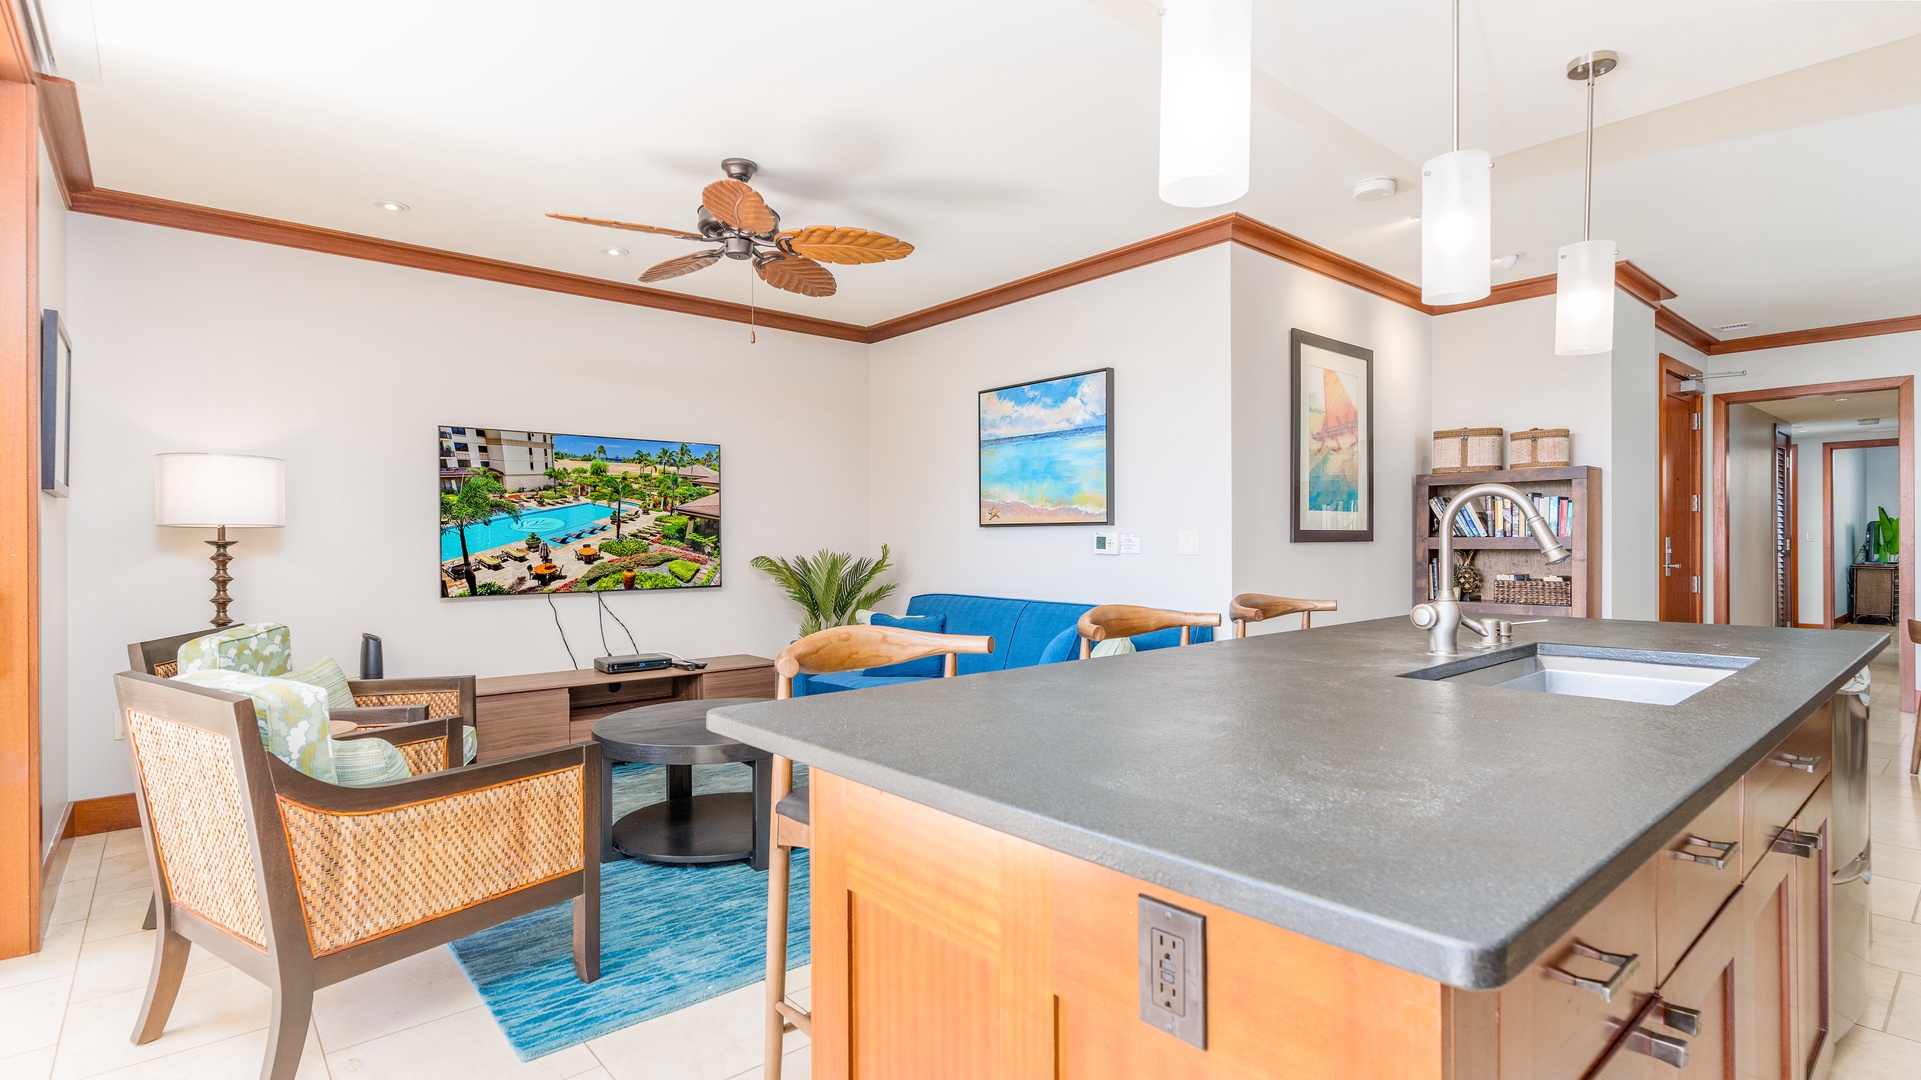 Kapolei Vacation Rentals, Ko Olina Beach Villas O305 - Set out the appetizers for the big game on TV.